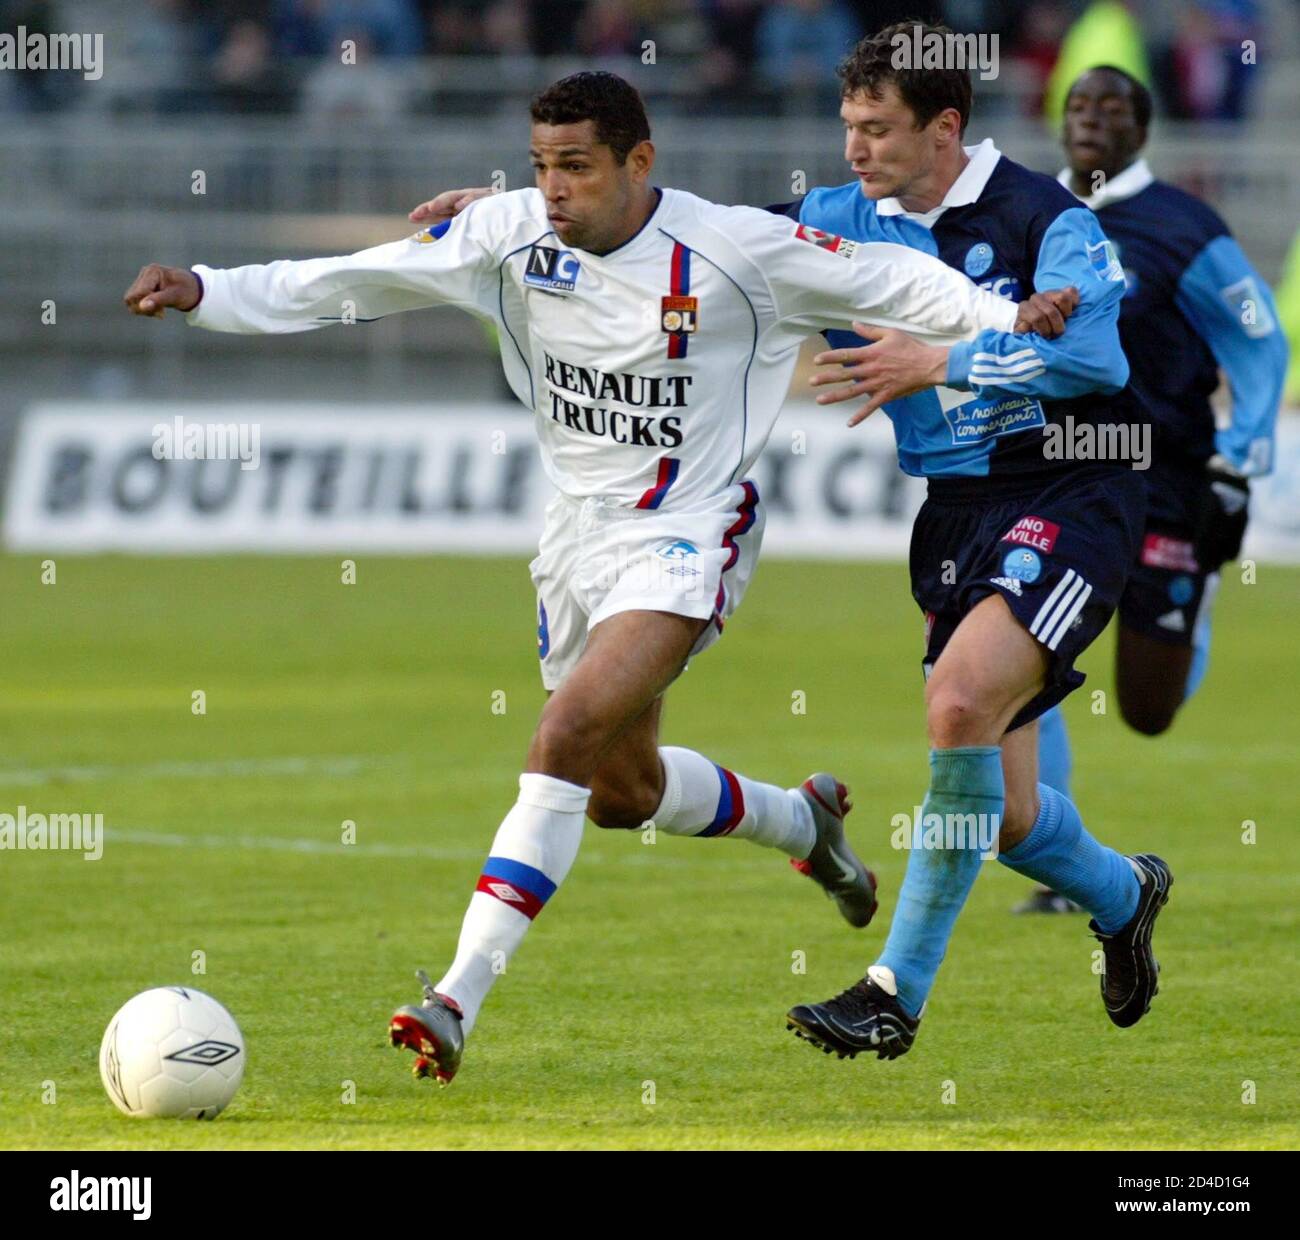 Sonny Anderson (L) of Olympique Lyon is challenged by Pierre Ducrocq of Le  Havre, during their French premier league soccer match at the Gerland  stadium, in Lyon, April 5, 2003. REUTERS/Robert Pratta